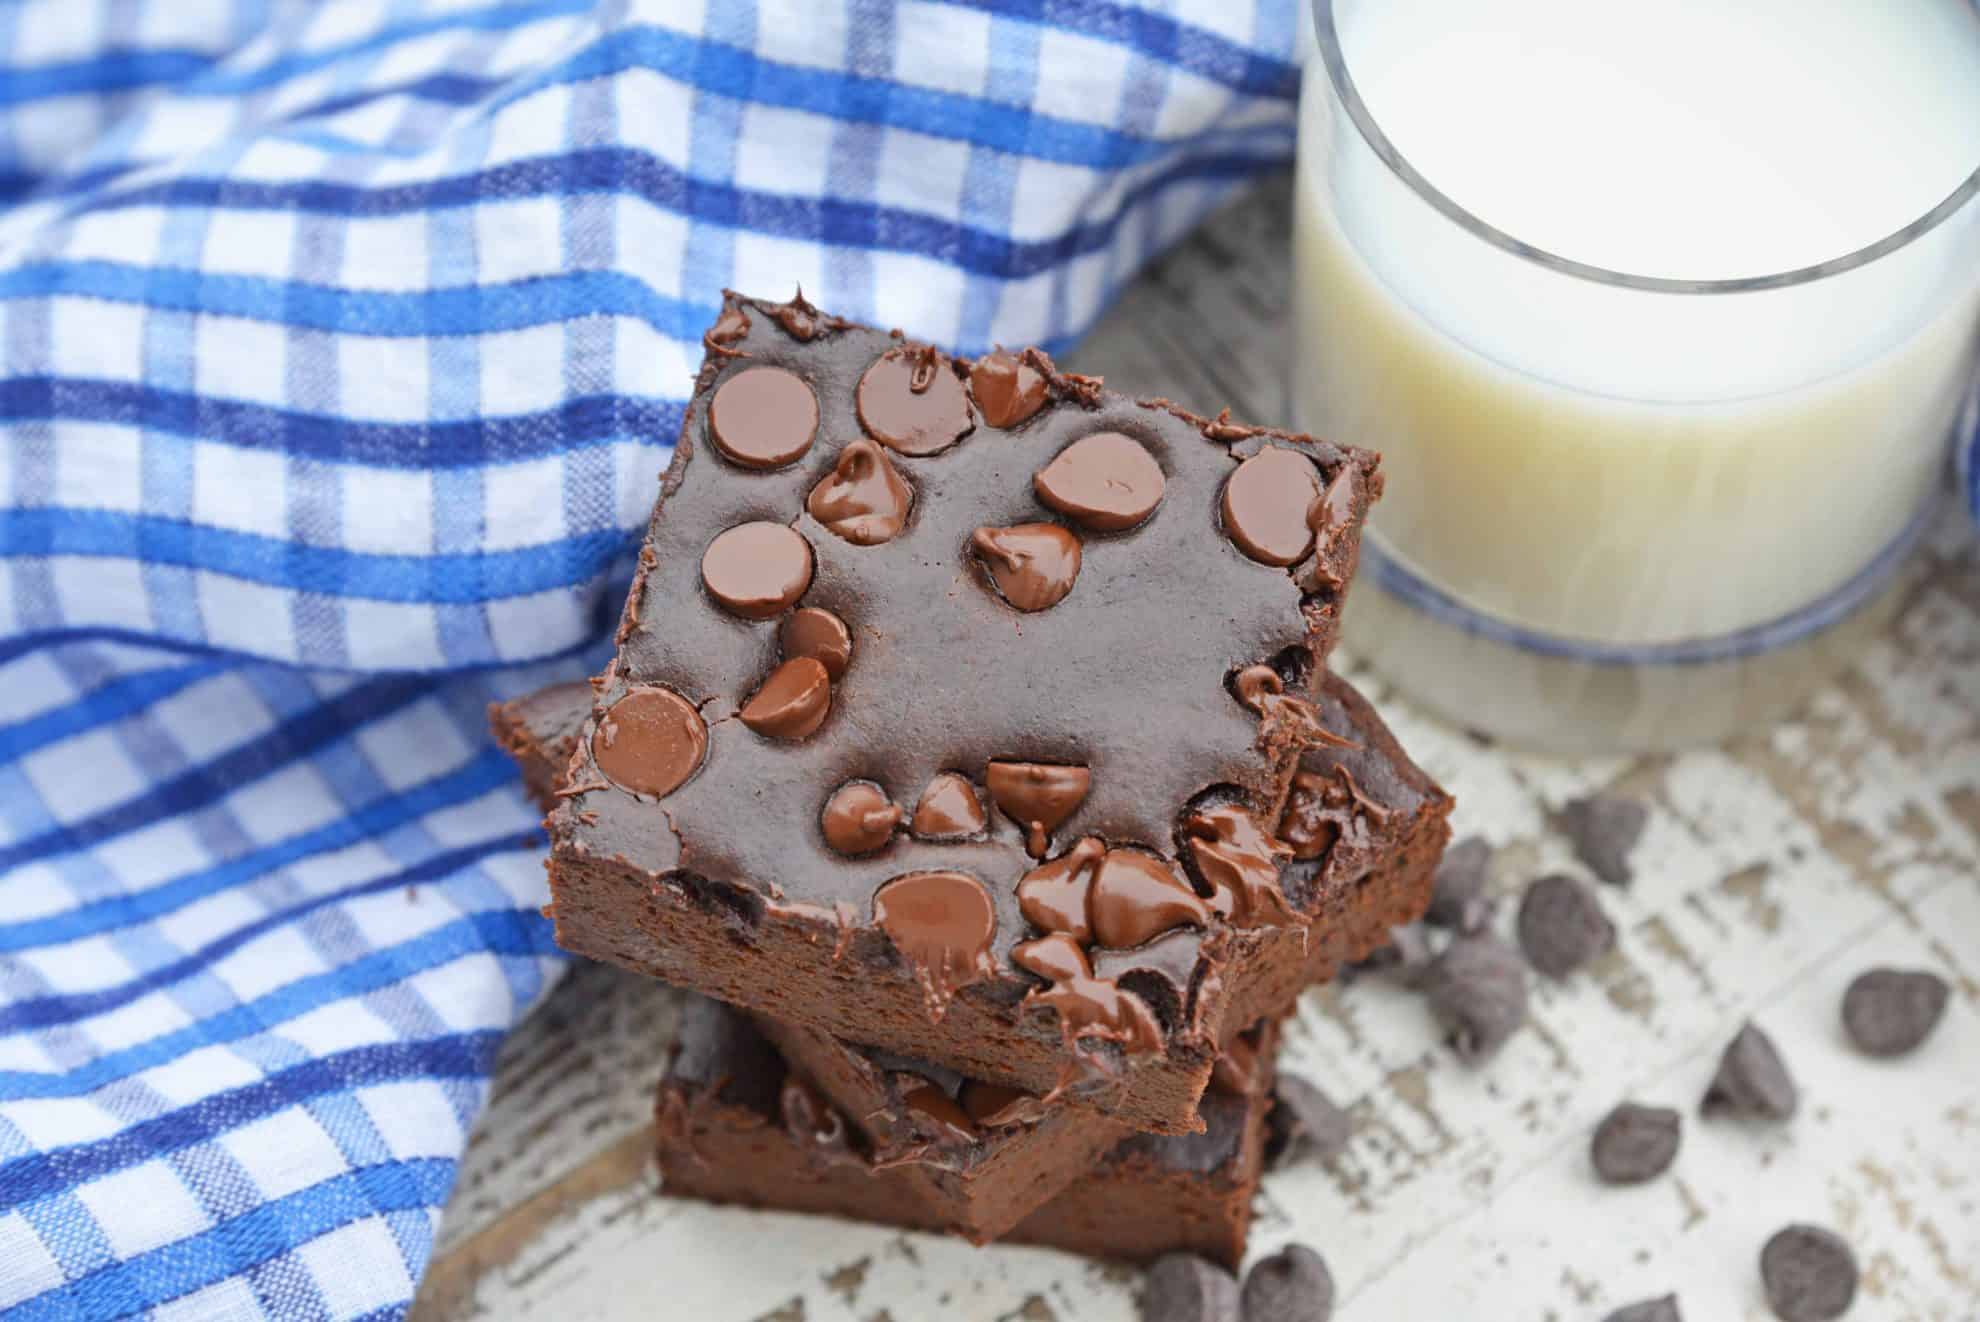 Flourless Black Bean Brownies are a delicious, fudgy gluten free brownie recipe. Healthy brownie recipes have never tasted this good! #glutenfreebrownies #homemadebrownies #flourlessbrownies #blackbeanbrownies www.savoryexperiments.com 